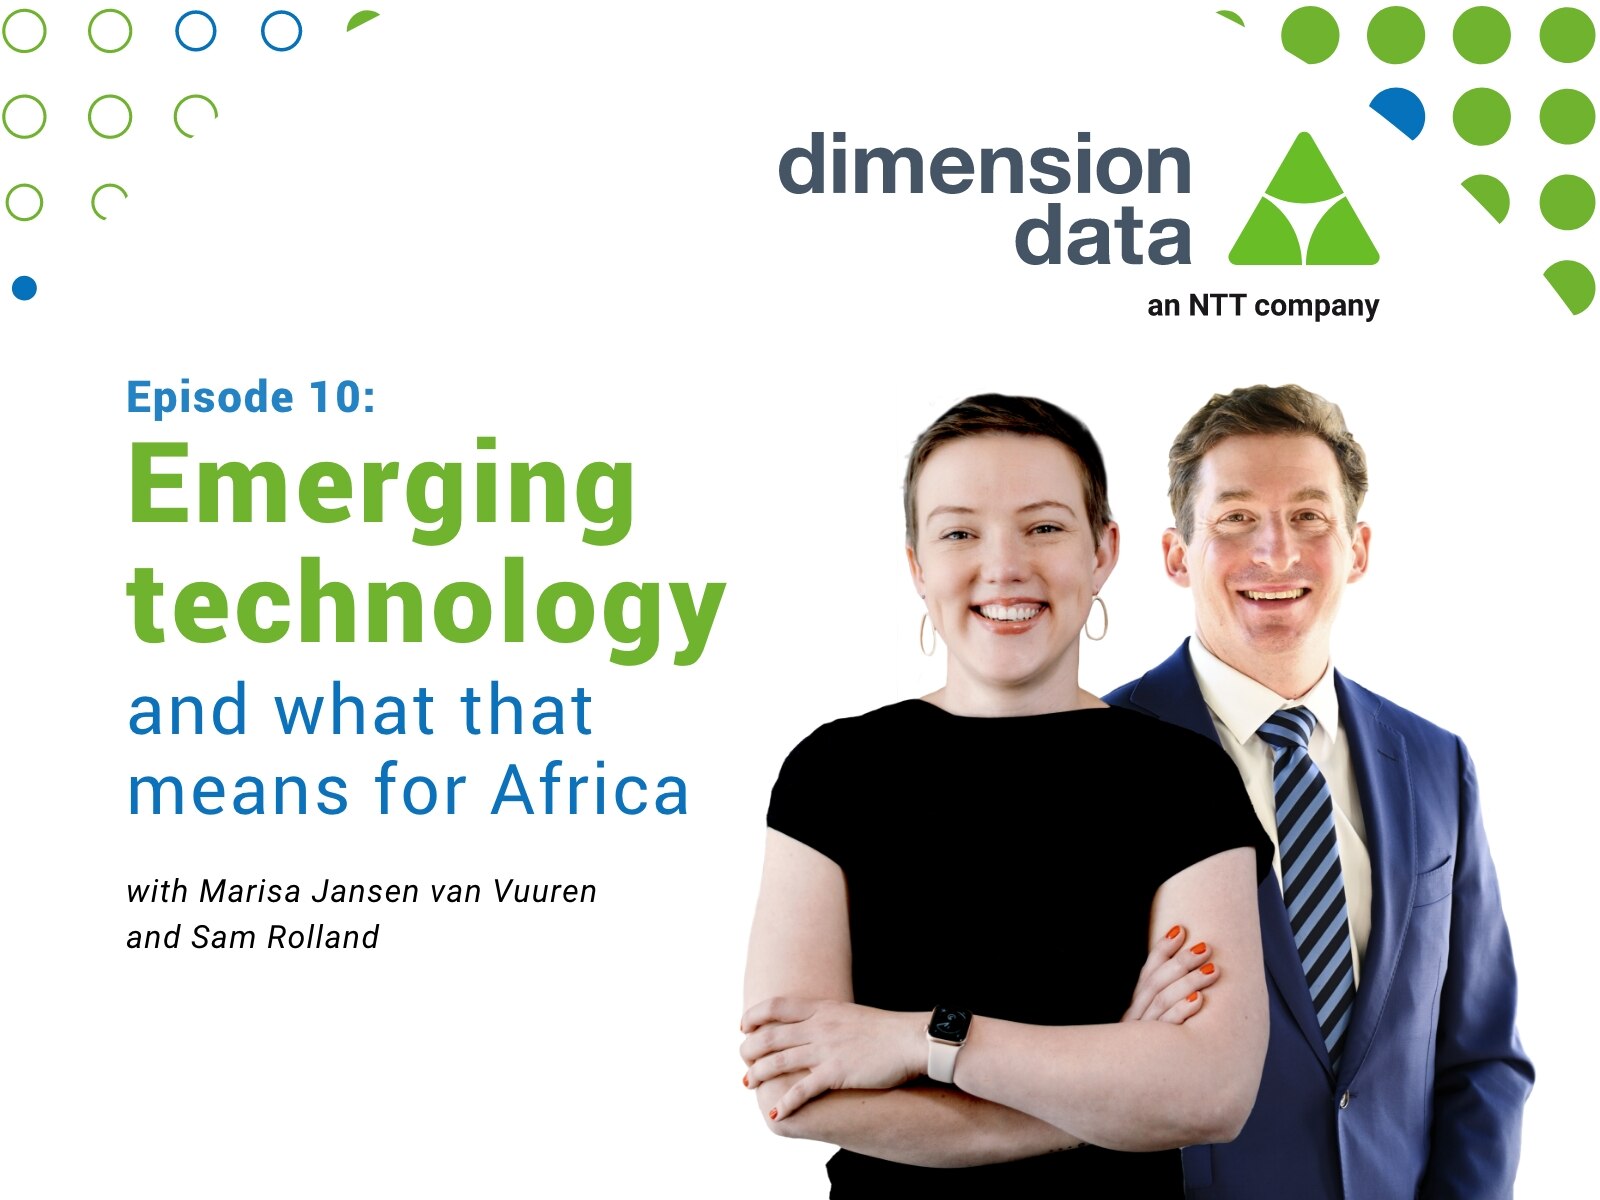 Tech Exchange Podcast Episode 10 - Emerging technology and what it means for Africa